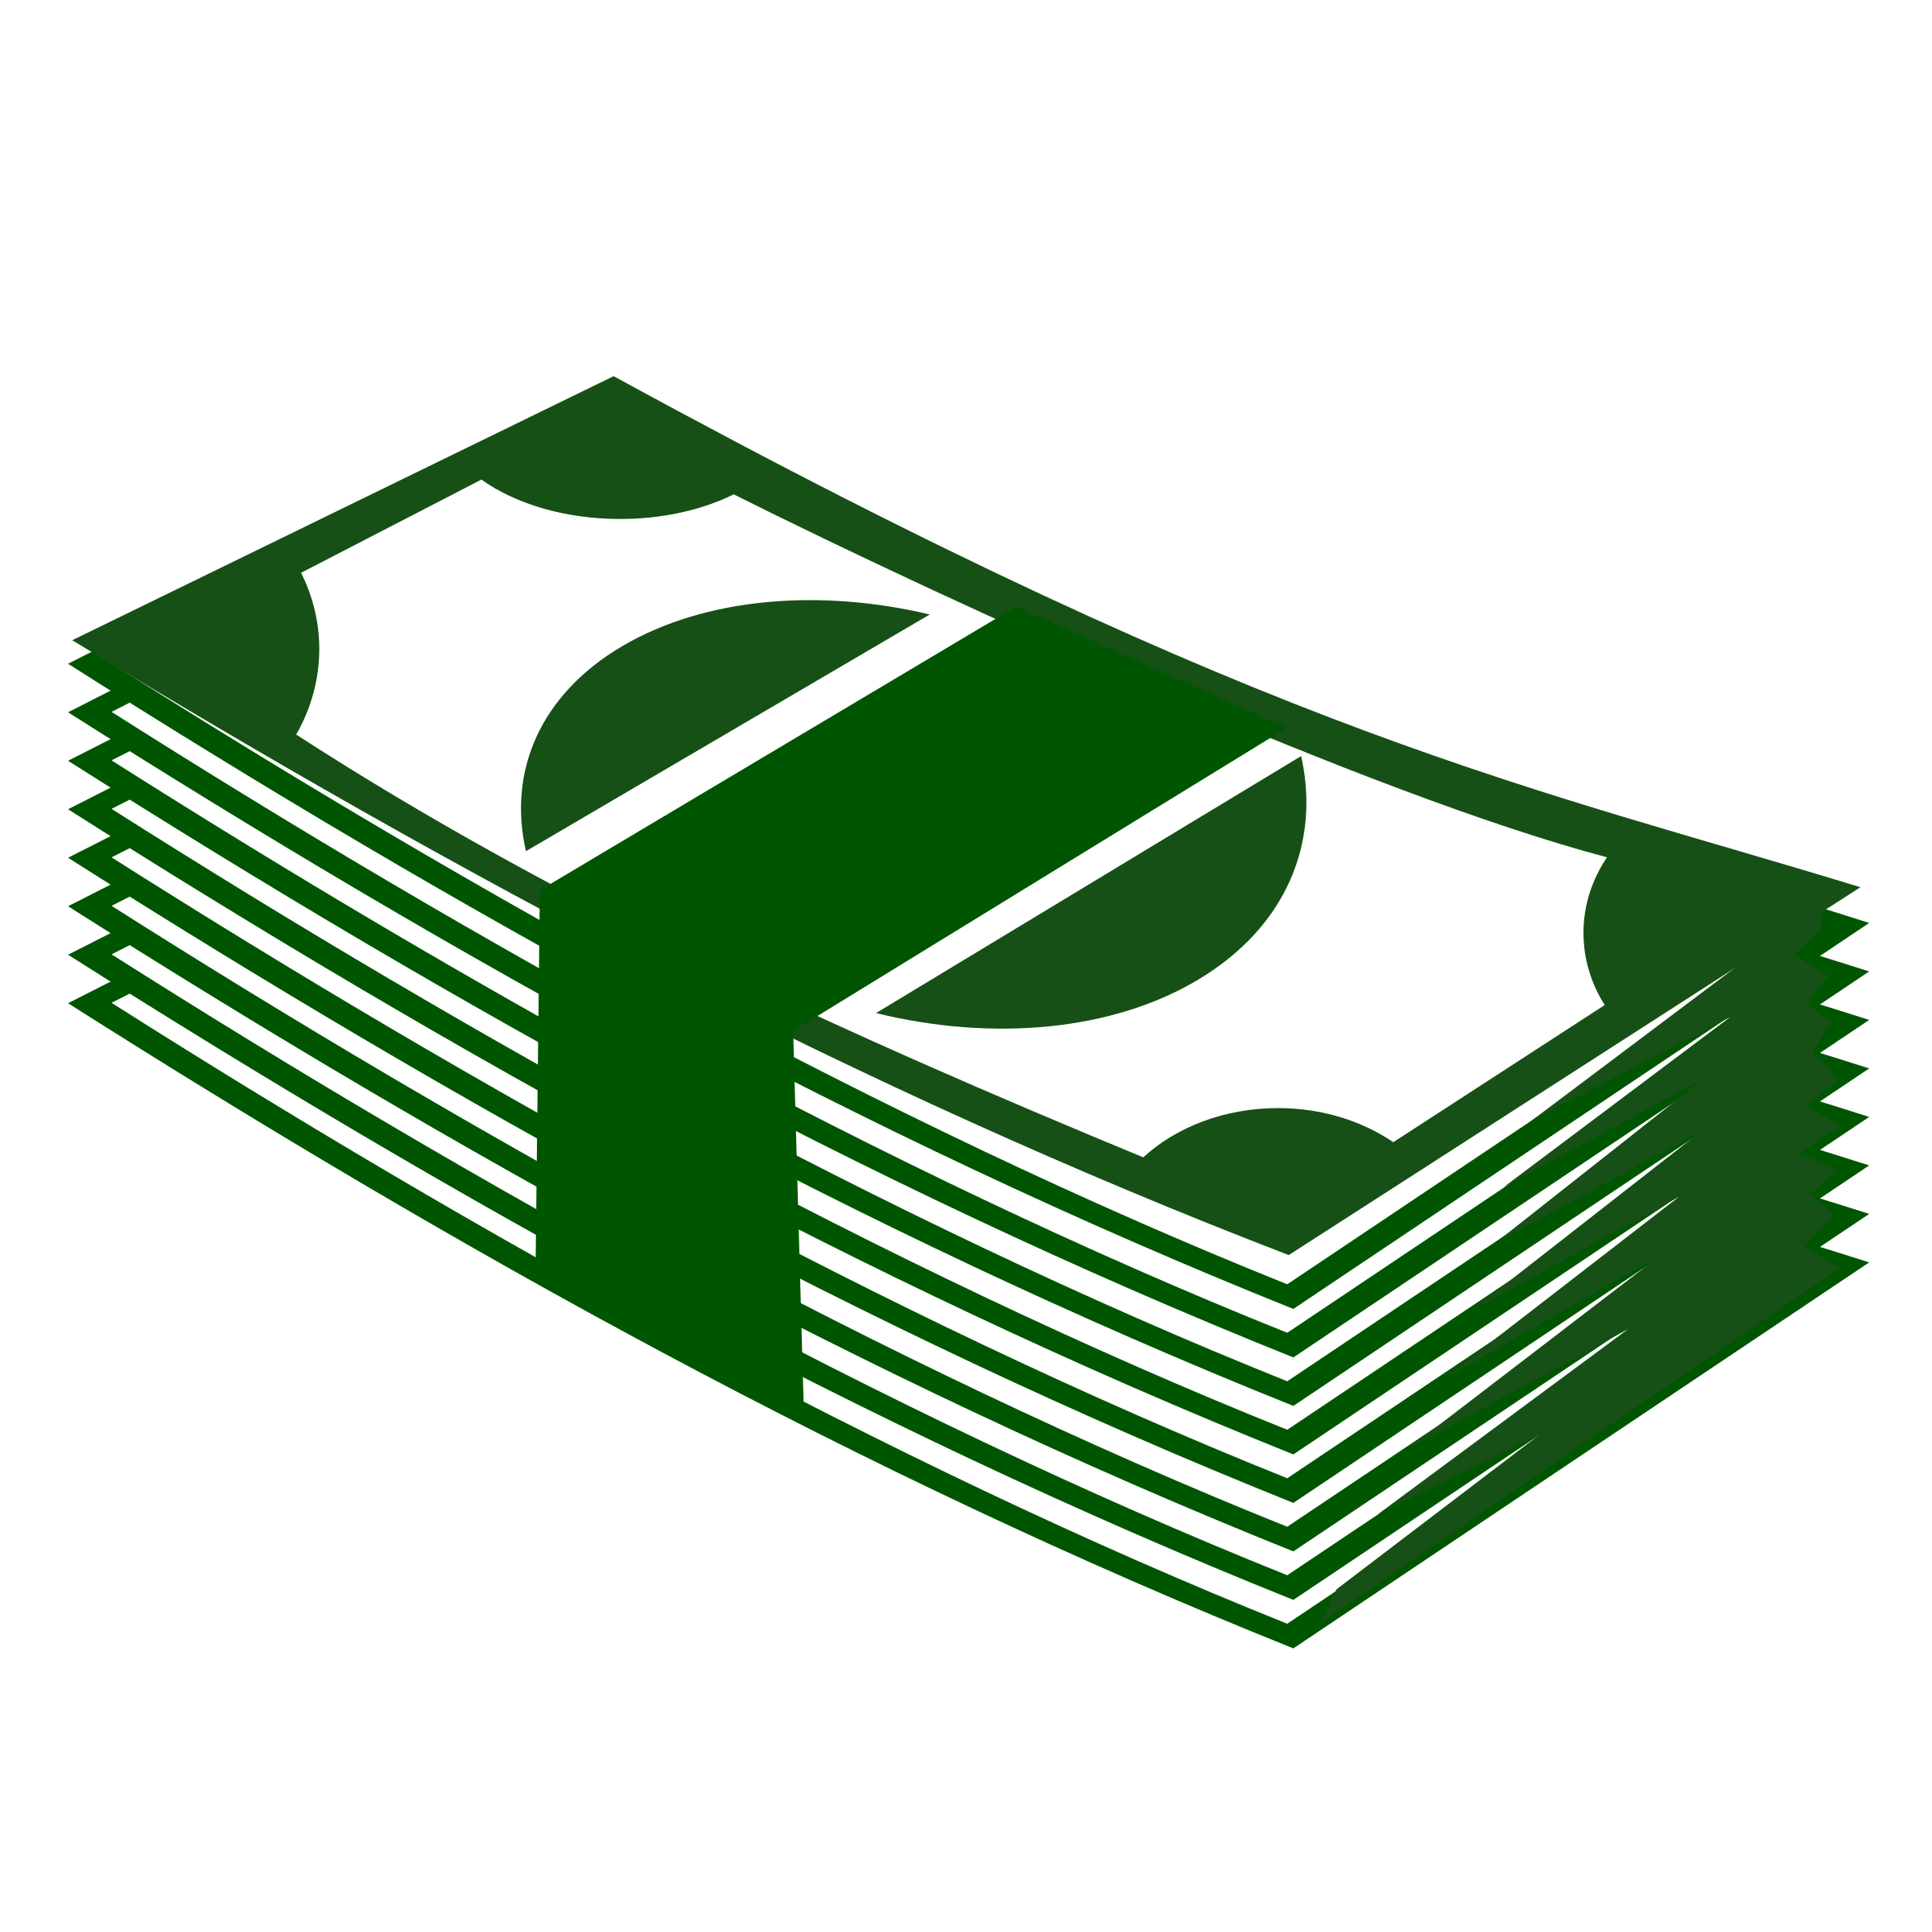 free clipart pictures of money - photo #32